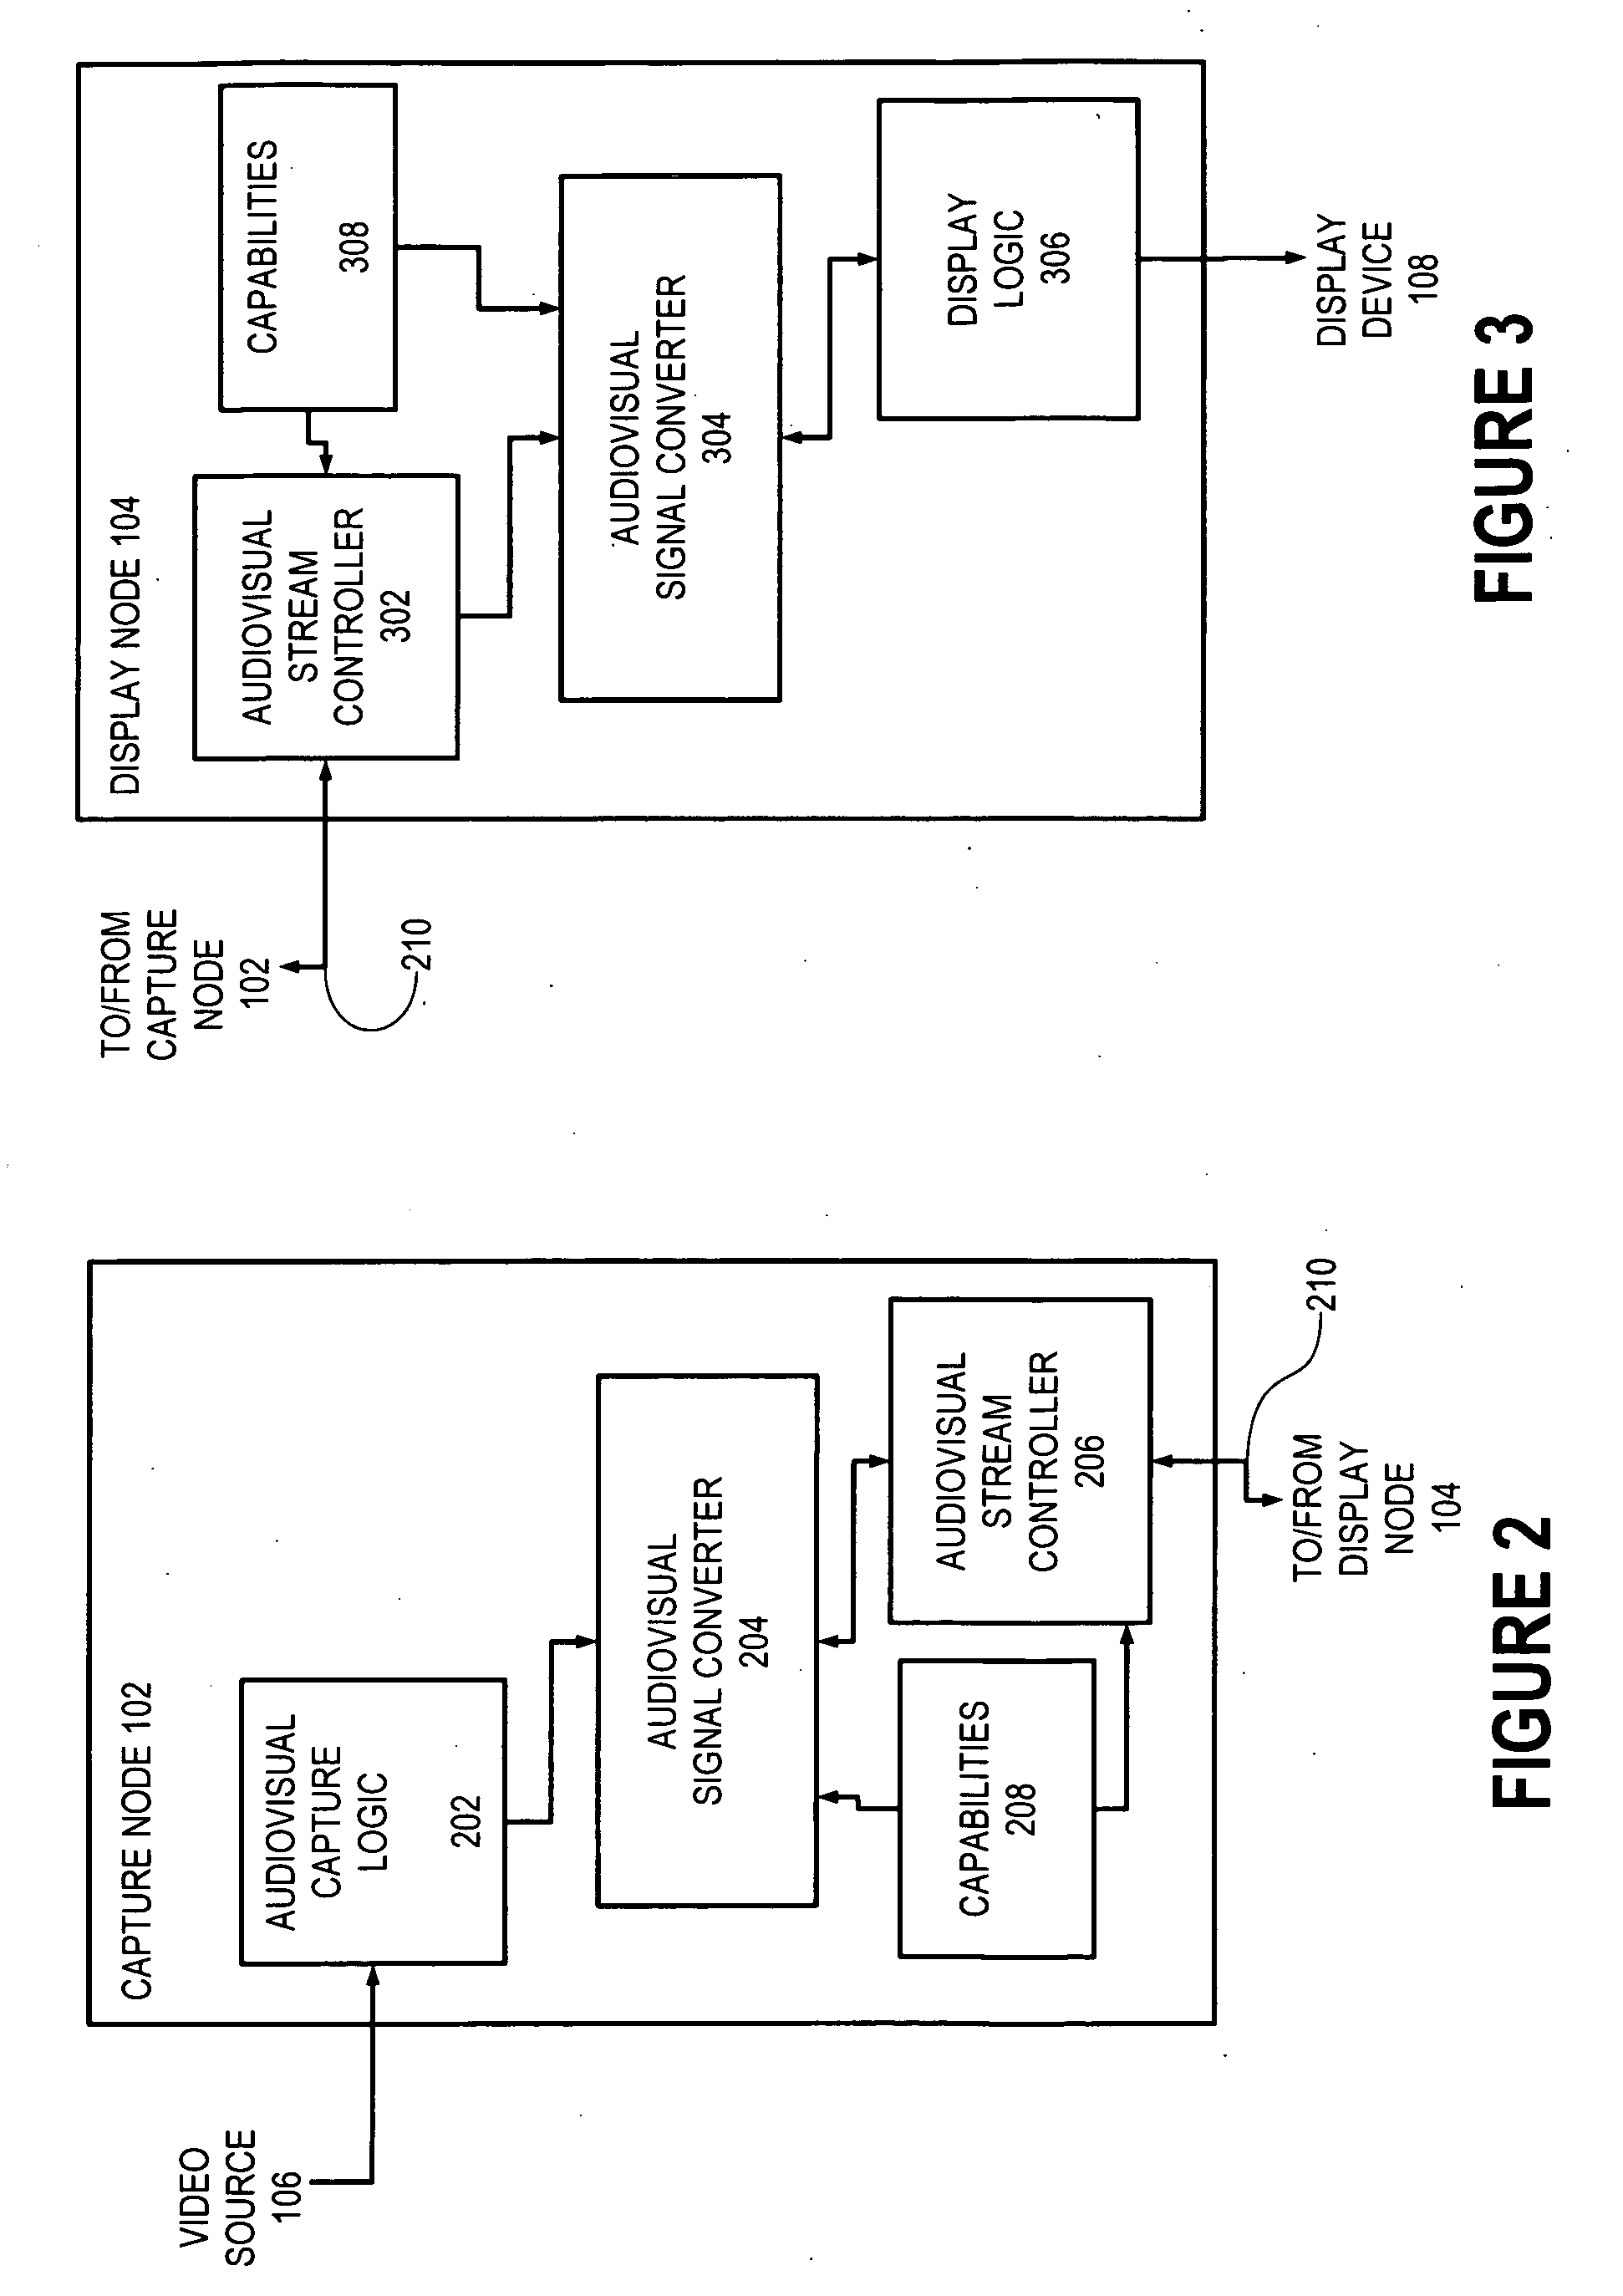 Display node for use in an audiovisual signal routing and distribution system